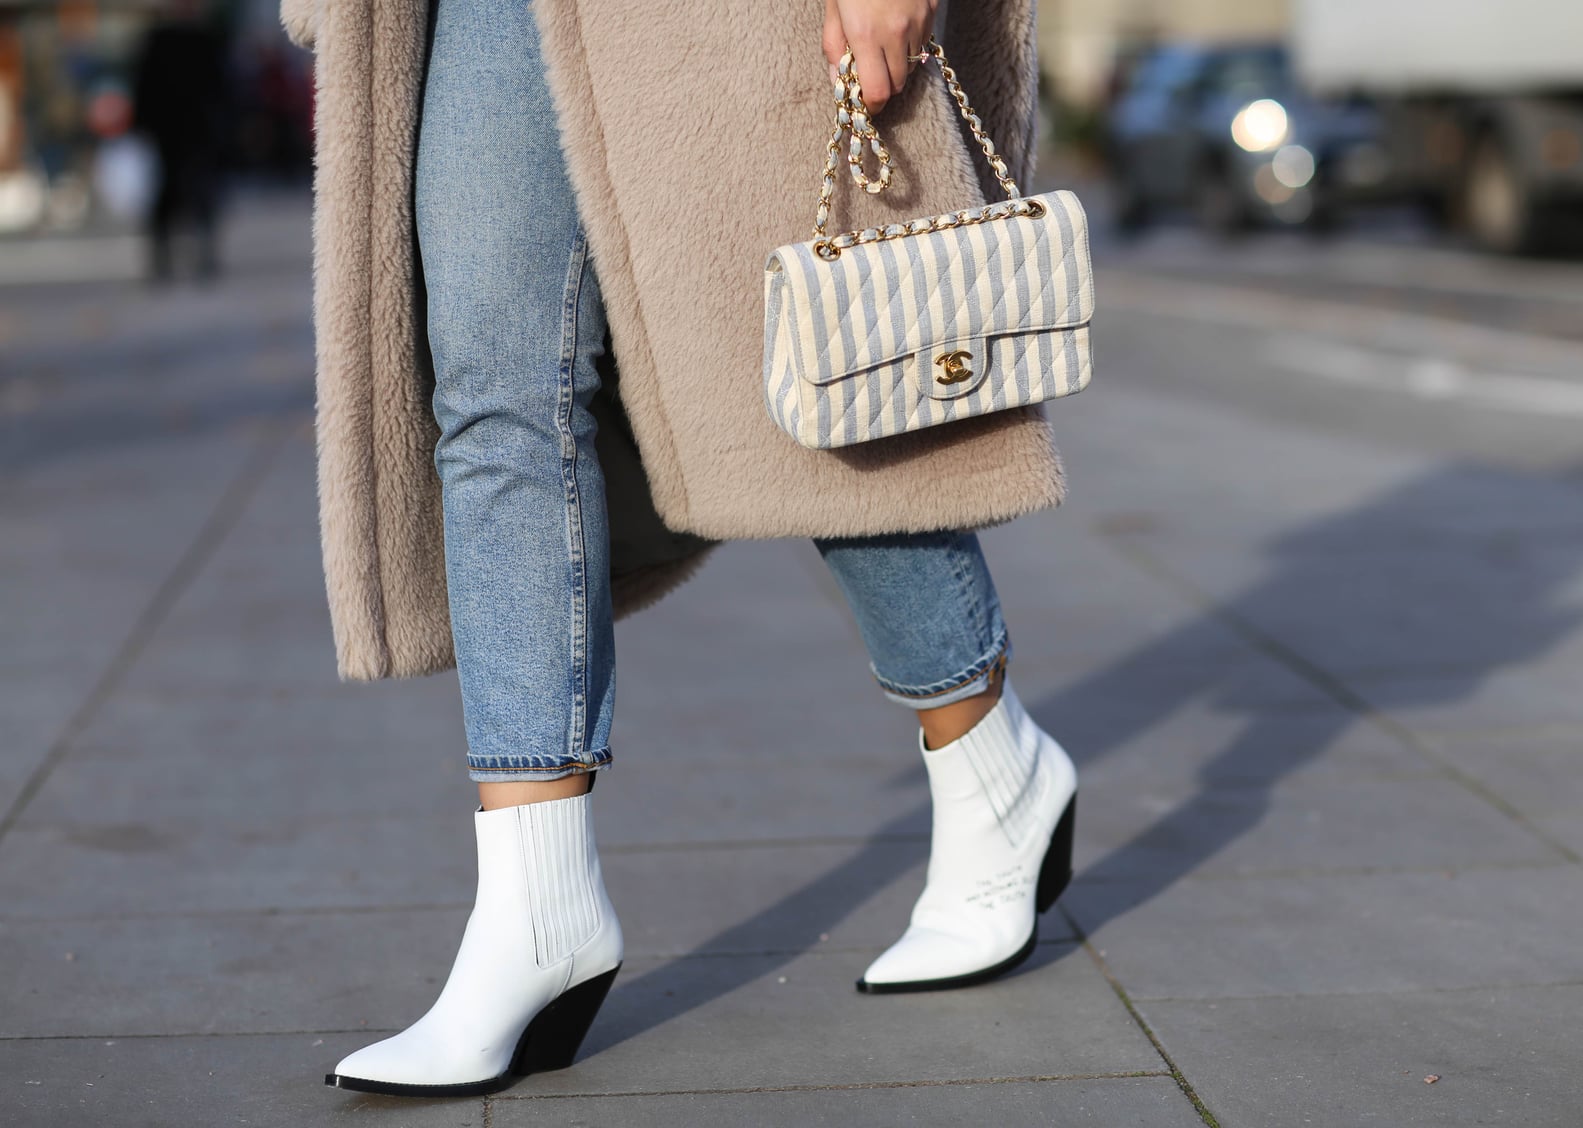 How to Style Boots in Winter | POPSUGAR Fashion